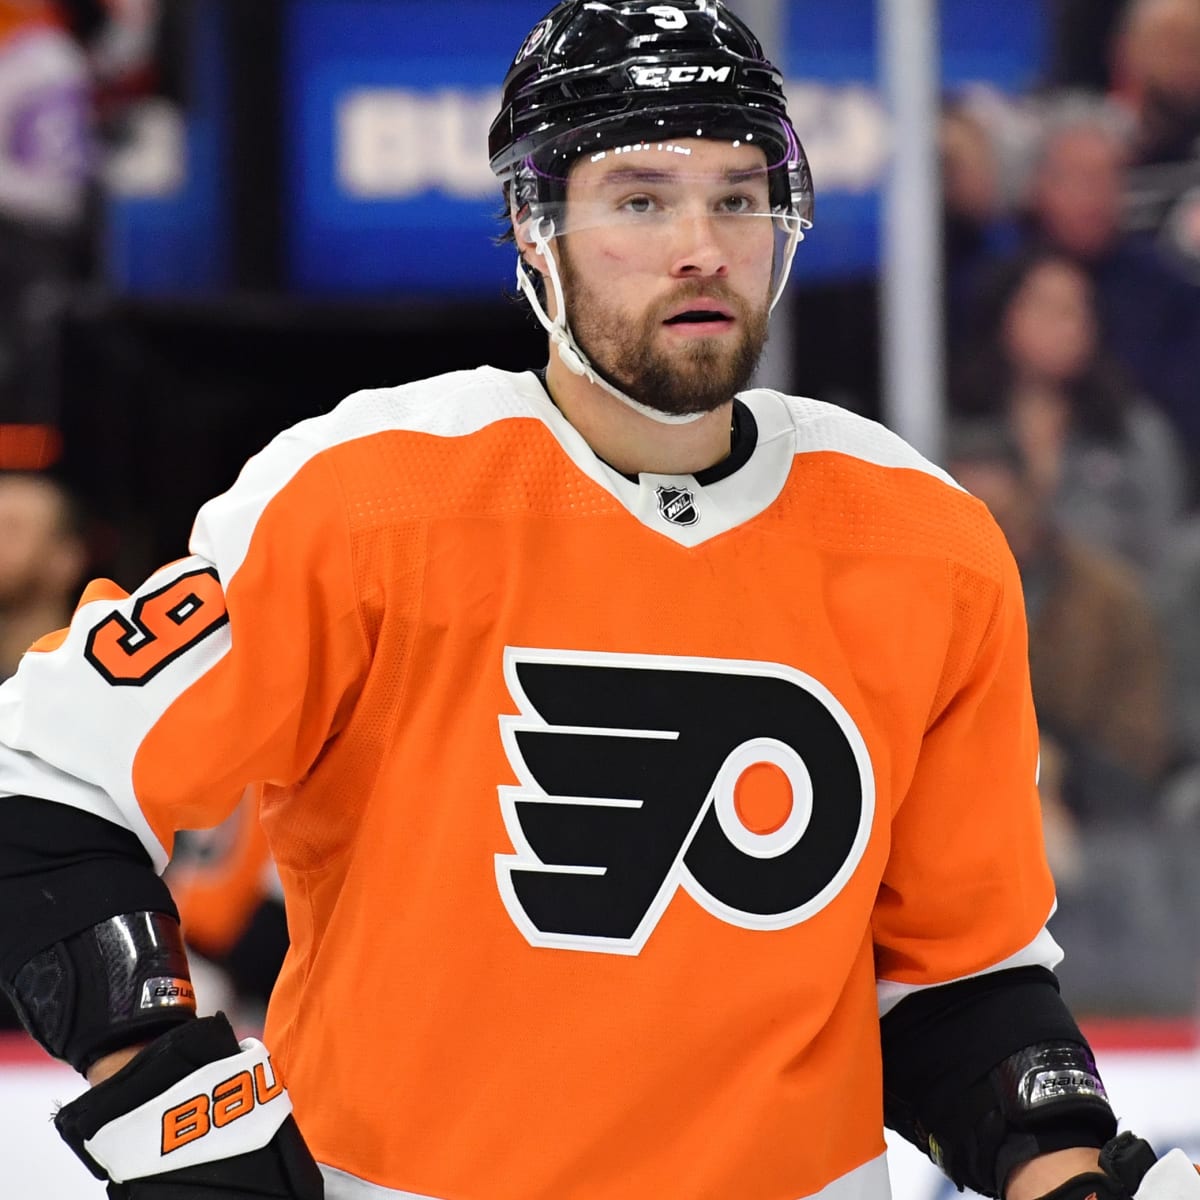 Flyers Defenseman Declines to Wear Pride Night Jersey During Warmups -  Sports Illustrated